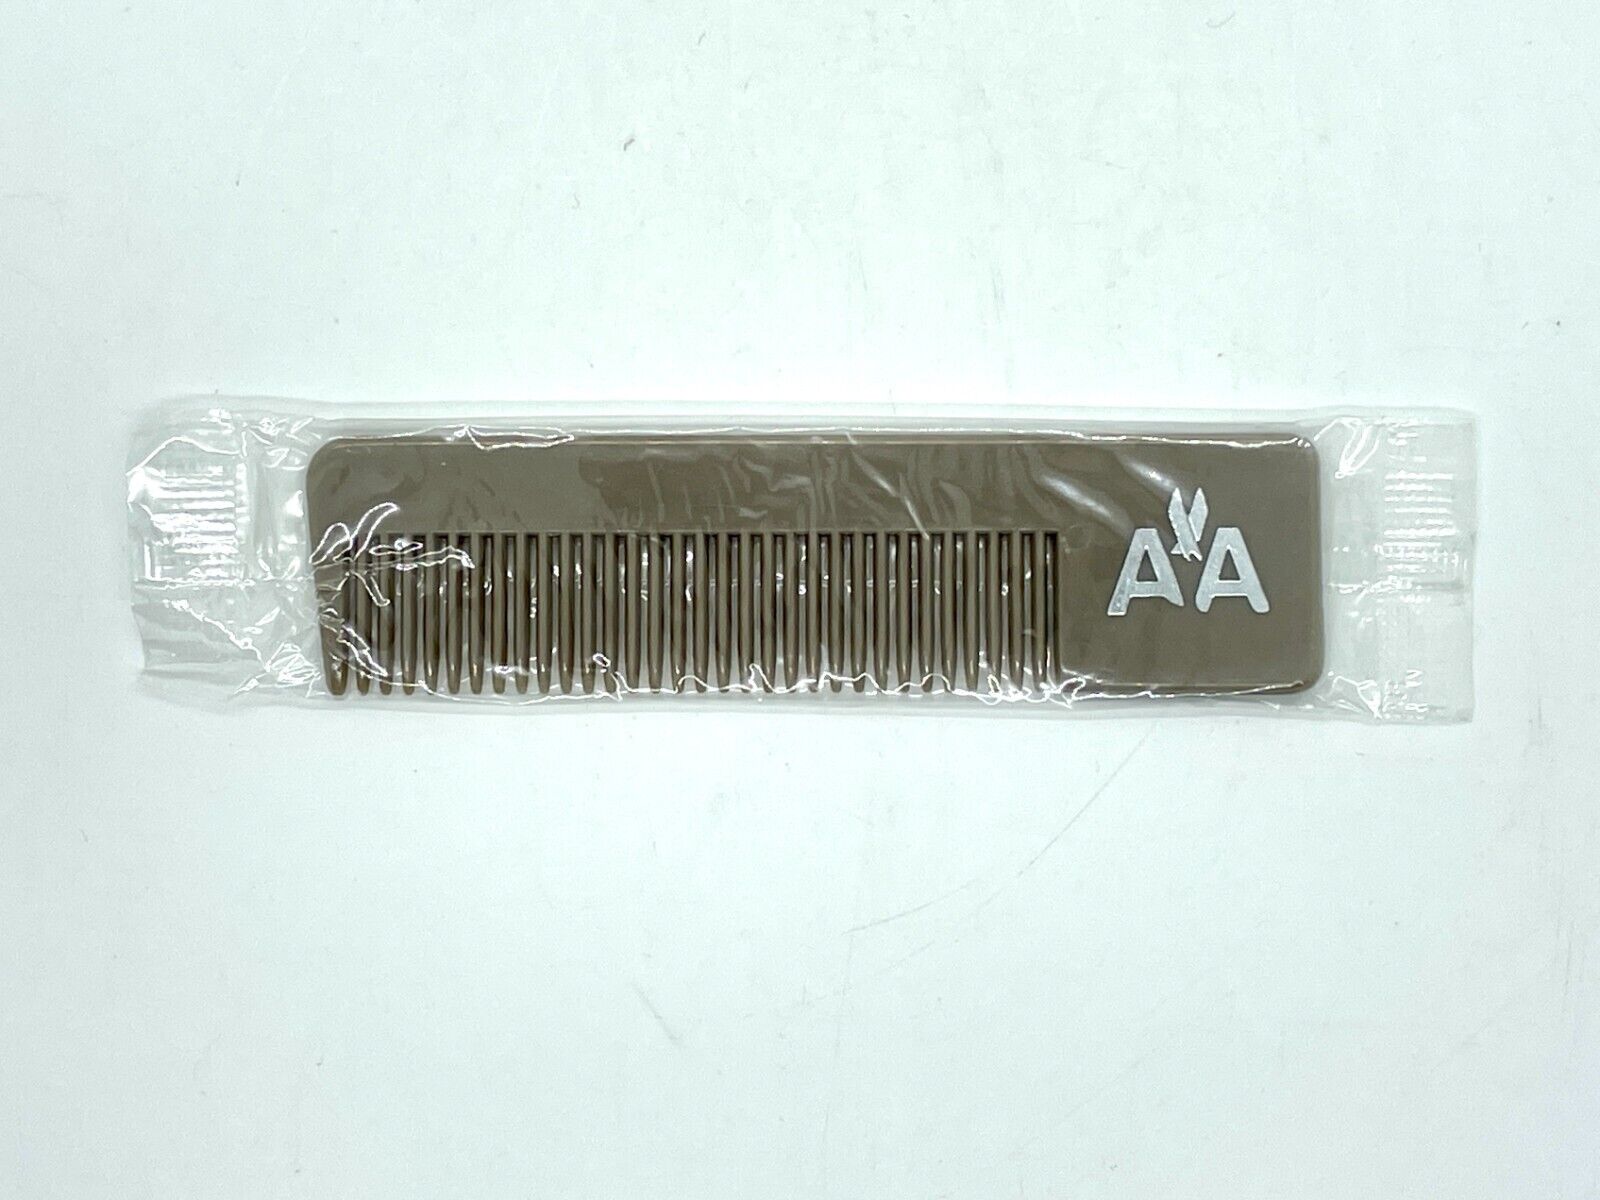 American Airlines Comb in Original Sealed Package